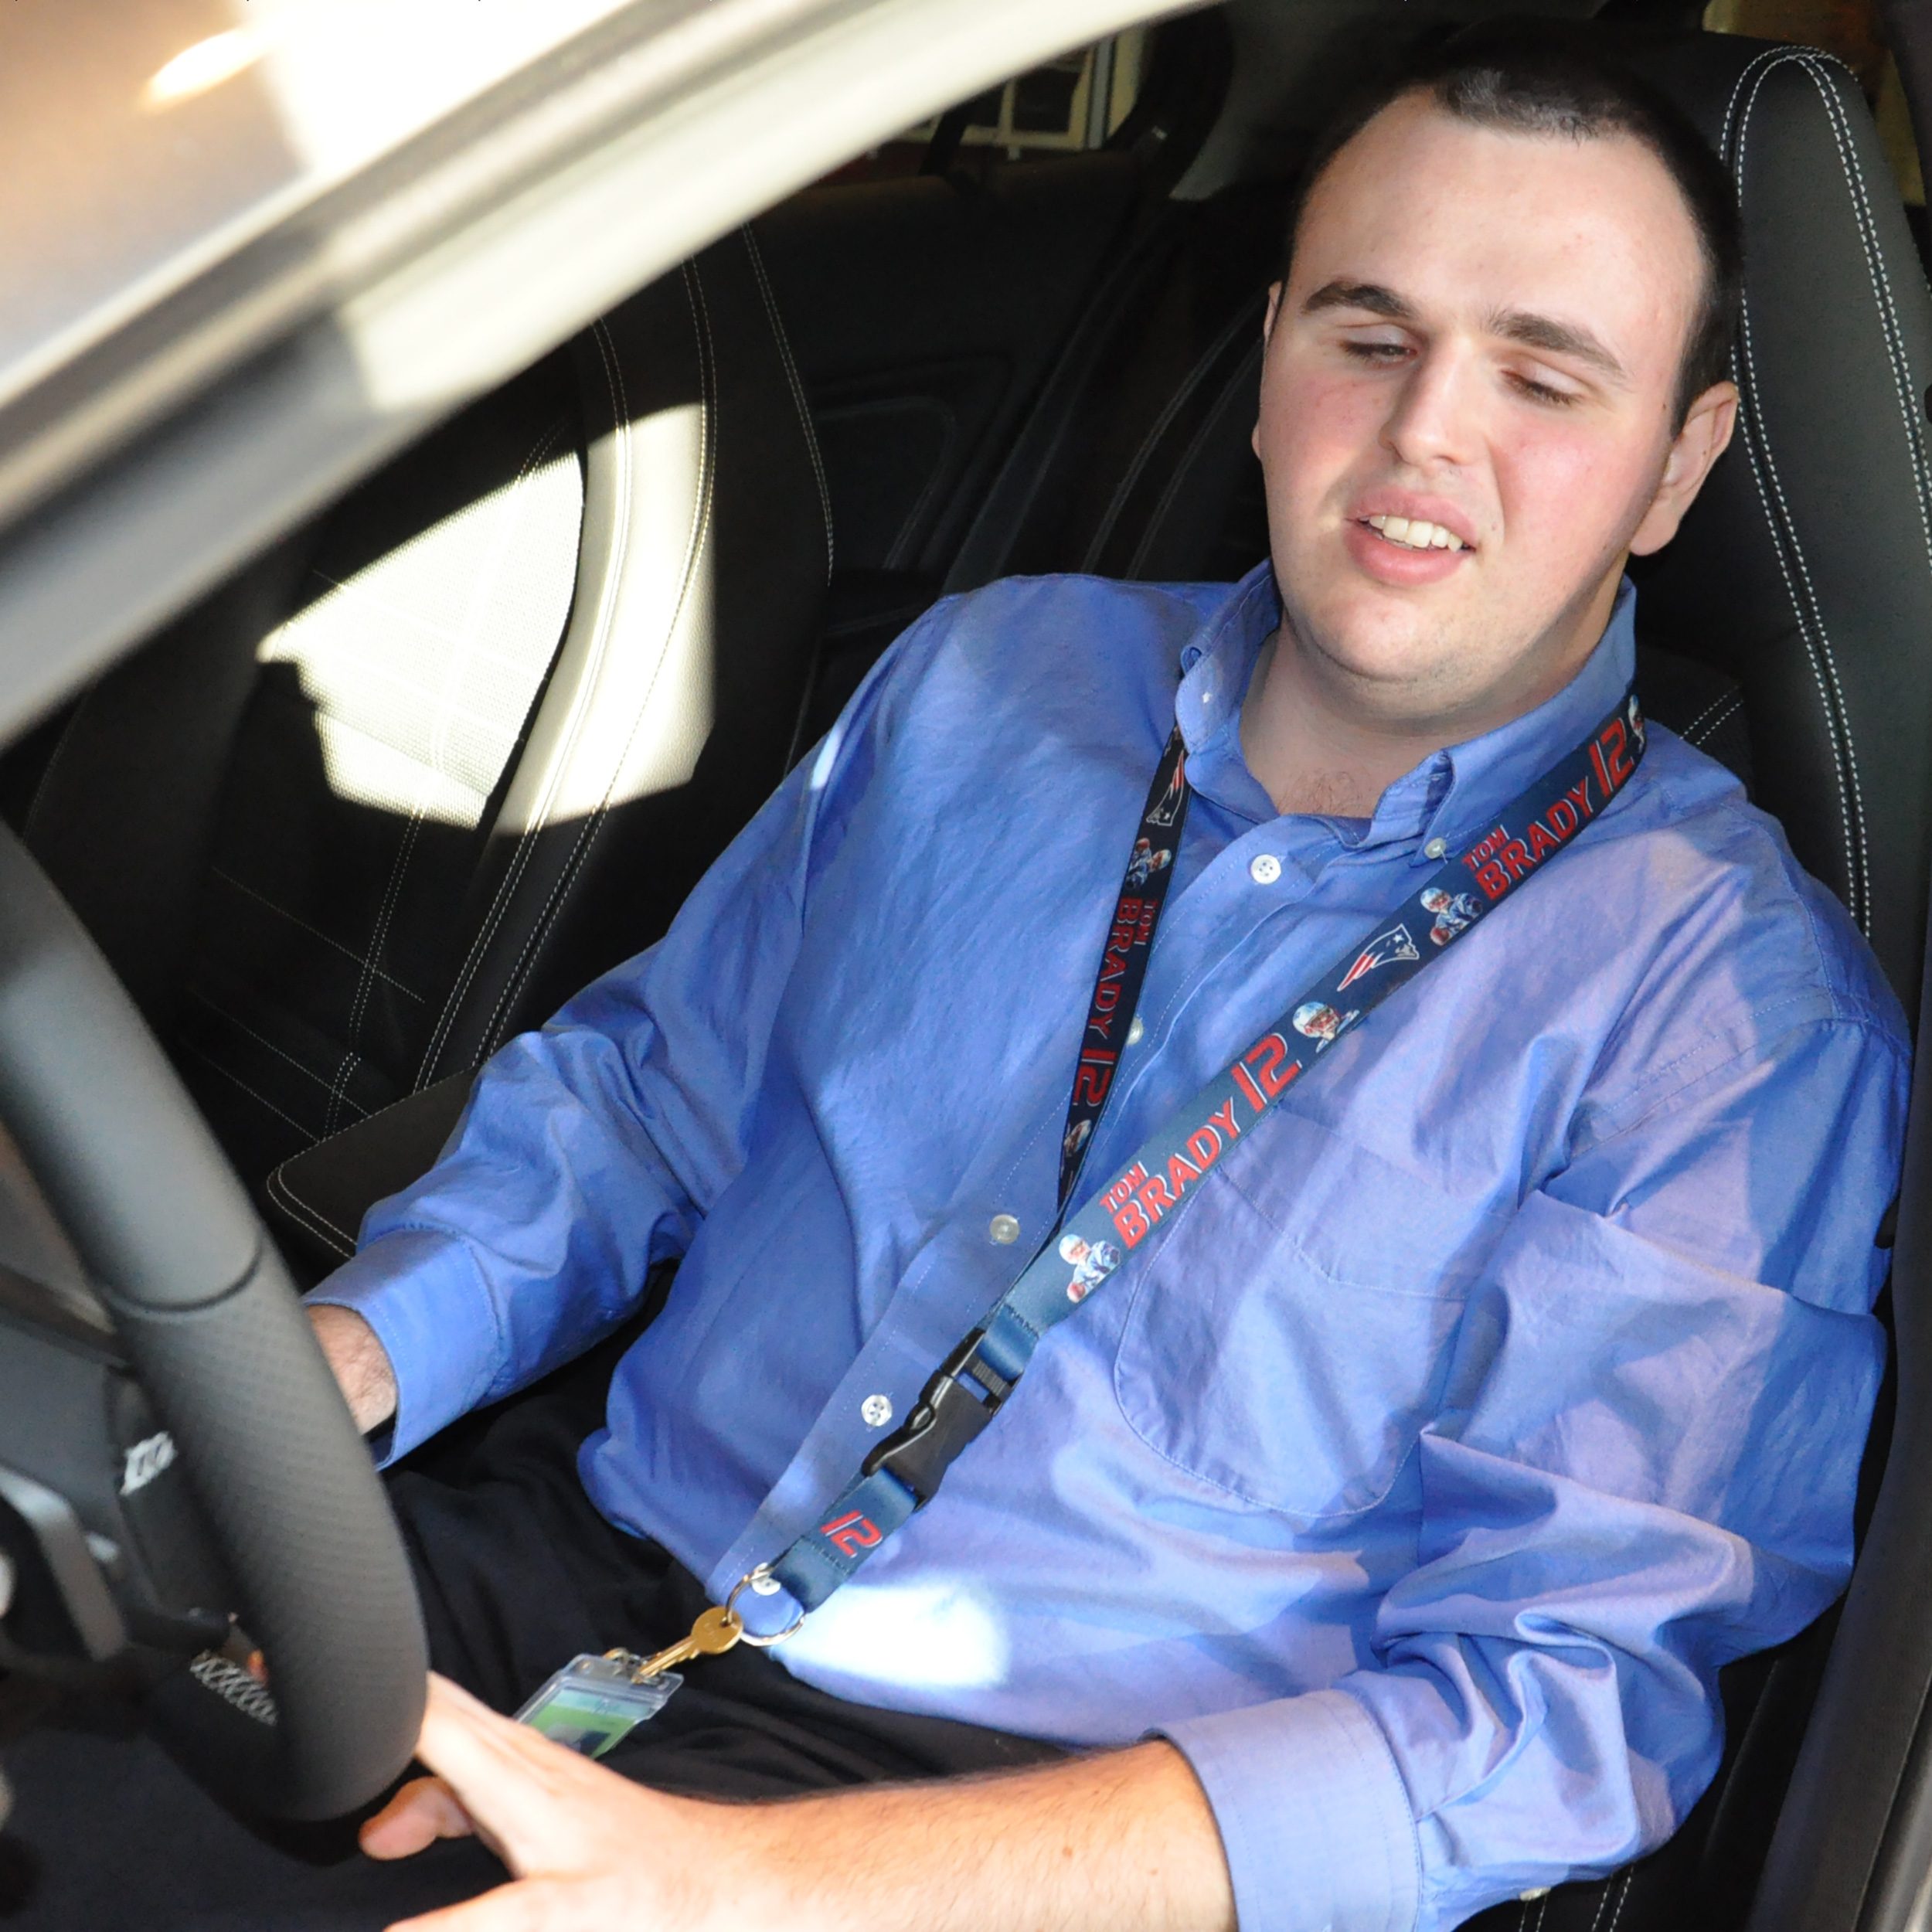 Adam Roberge smiling, sitting in the driver's seat of a car